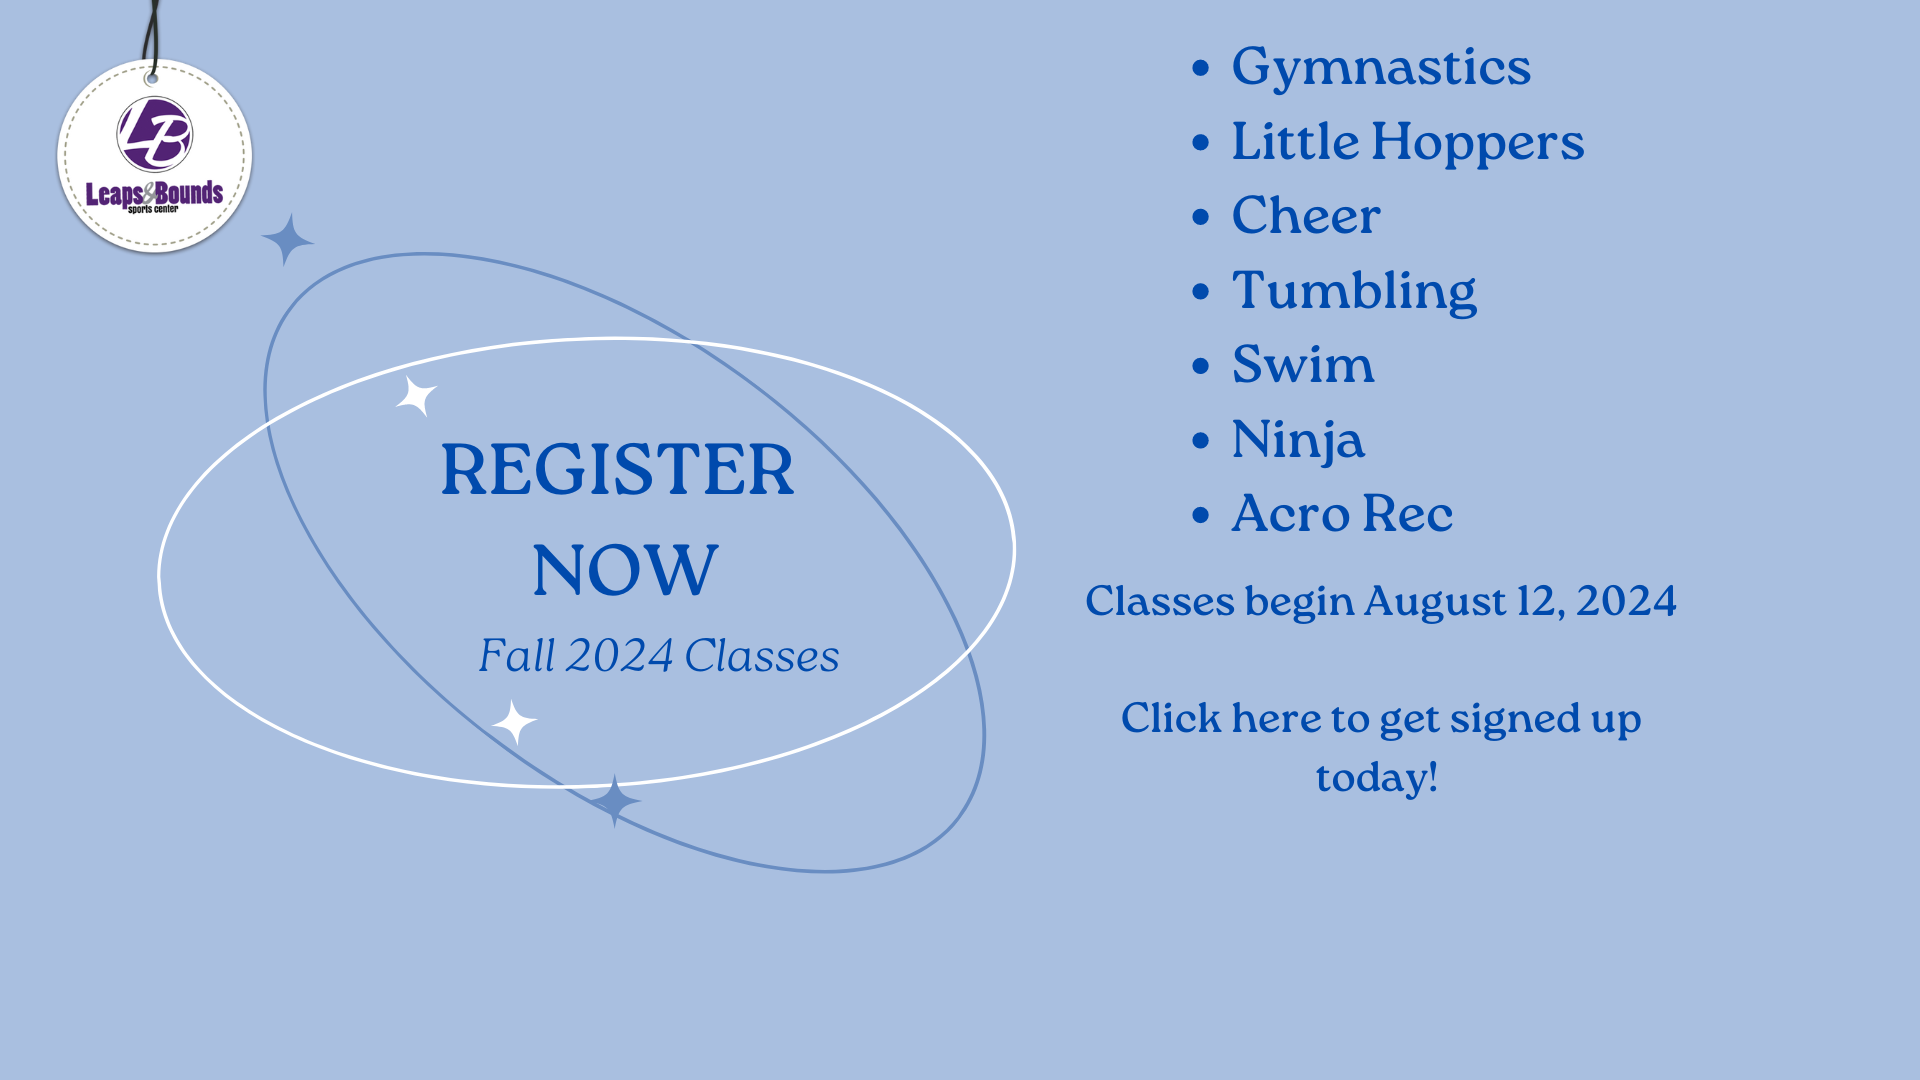 A promotional graphic for Leapz & Boundz Fall 2024 Classes on a light blue background. It lists various classes: Gymnastics, Little Hoppers, Cheer, Tumbling, Swim, Ninja, and Acro Rec. Text in the center reads "REGISTER NOW Fall 2024 Classes" with a link to sign up. Classes begin August 12, 2024.